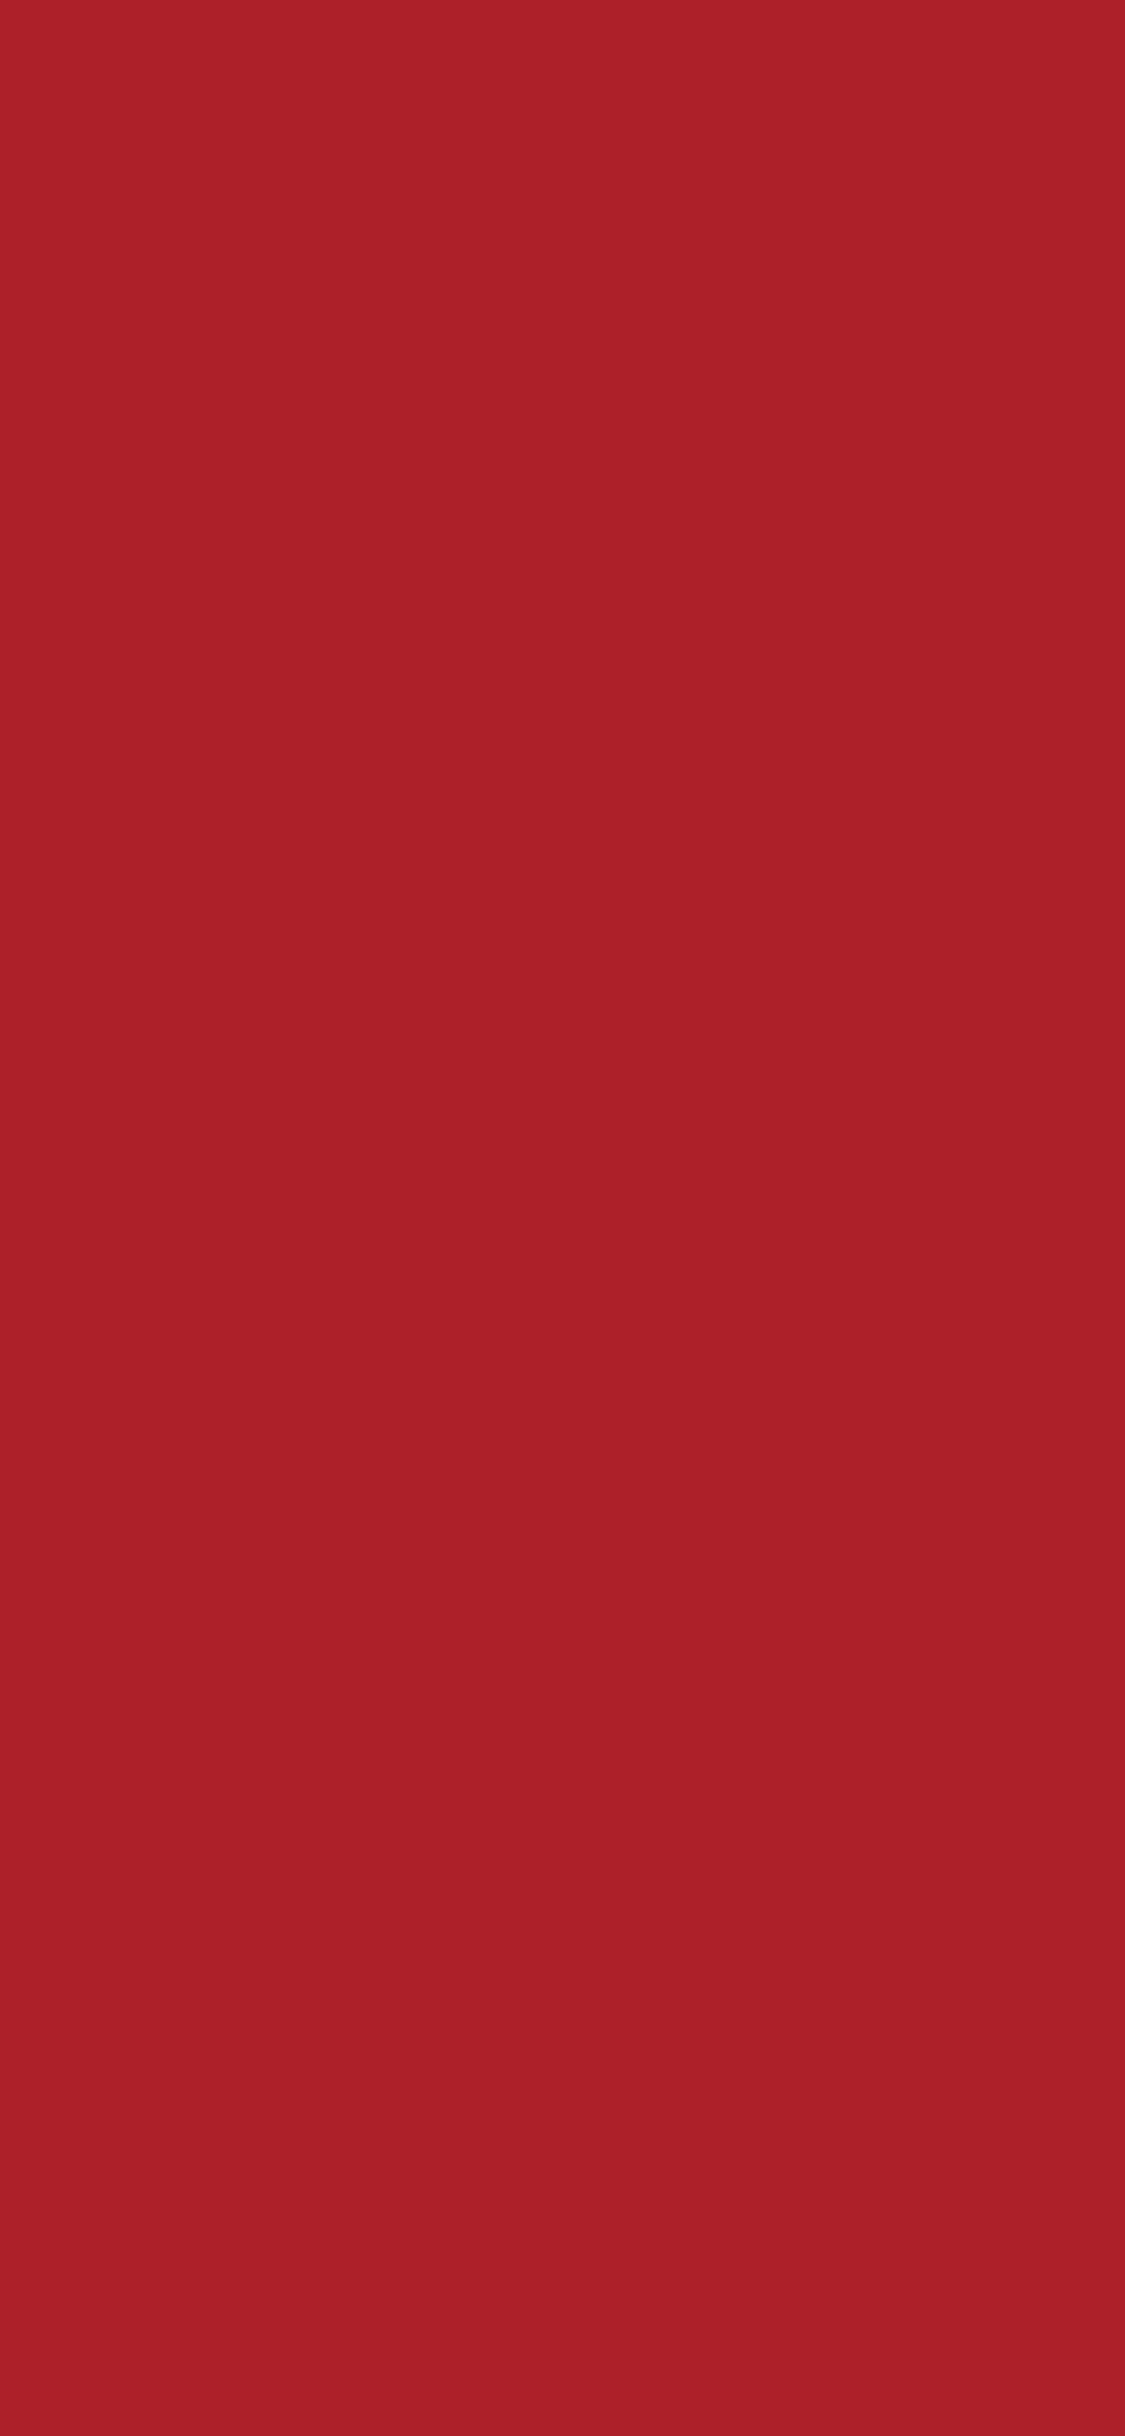 1125x2436 Upsdell Red Solid Color Background